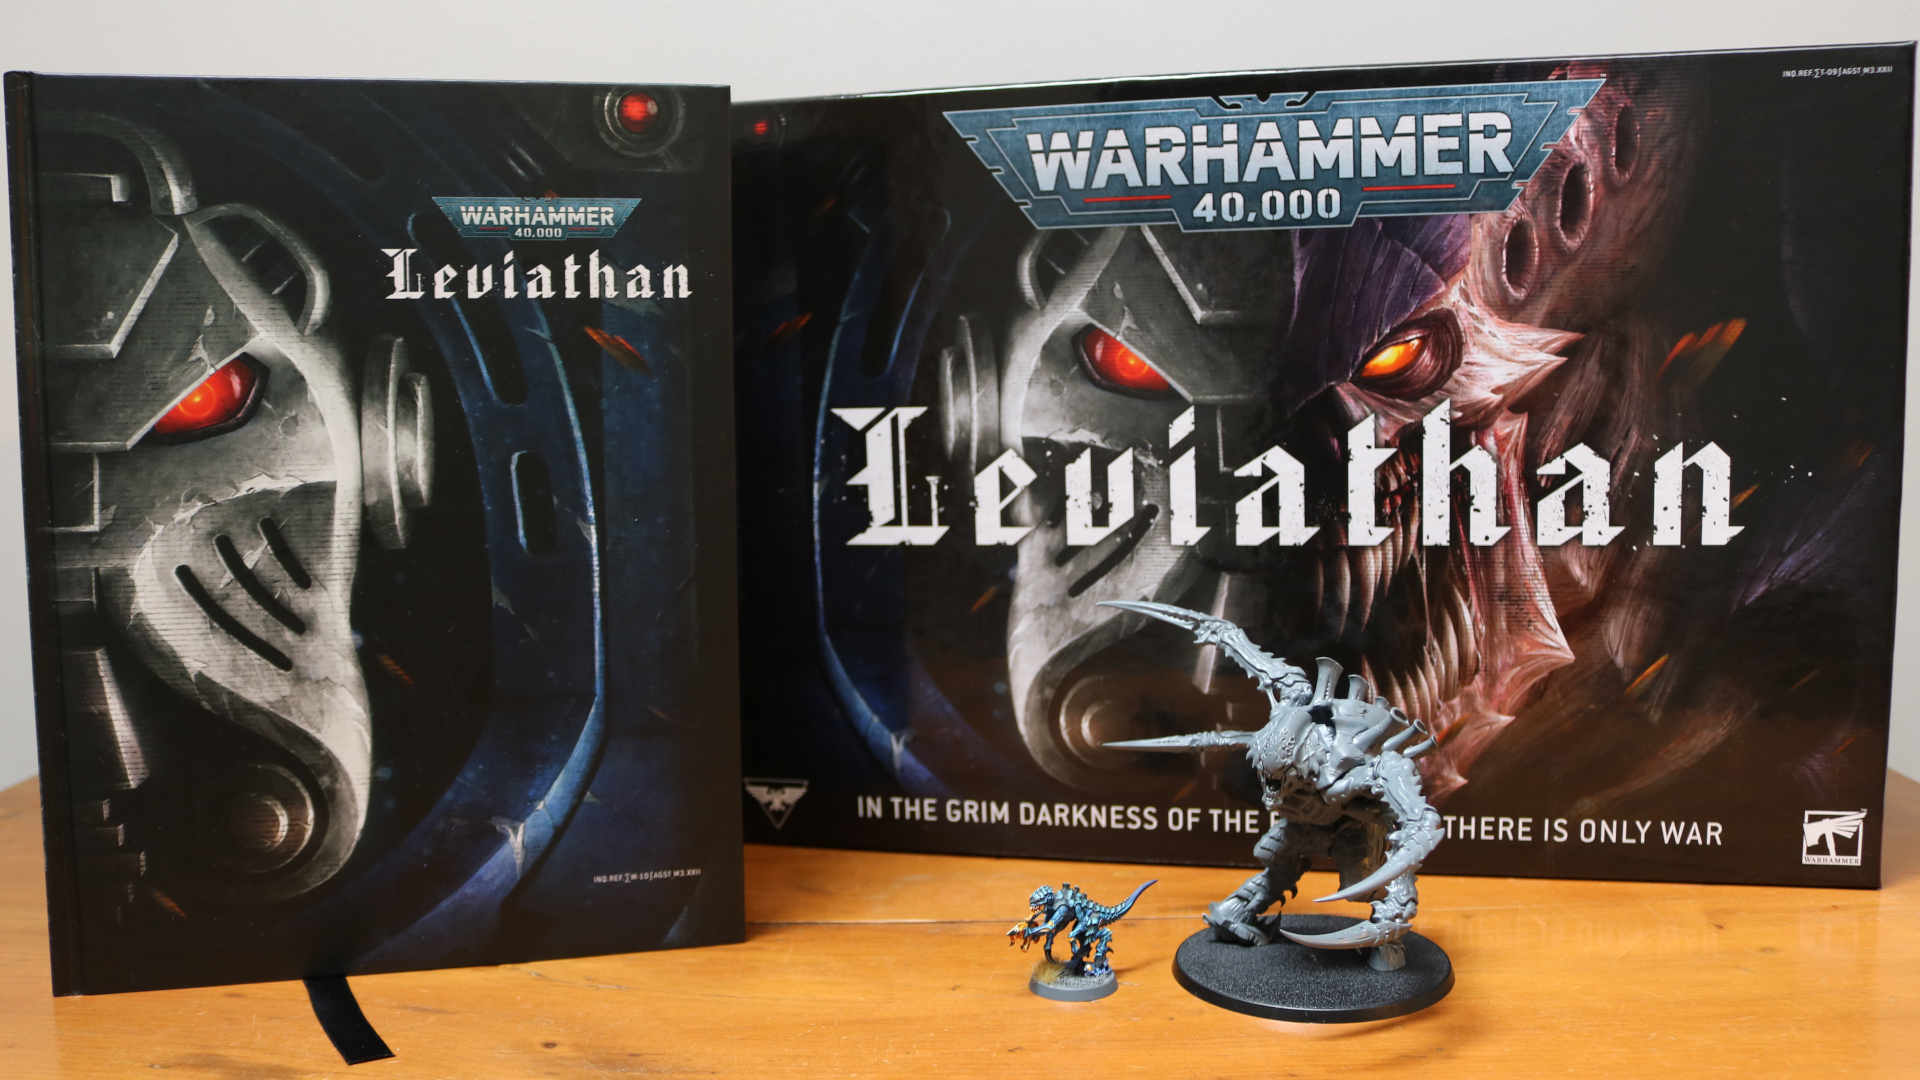 Warhammer 40K Leviathan impressions: incredible value for money